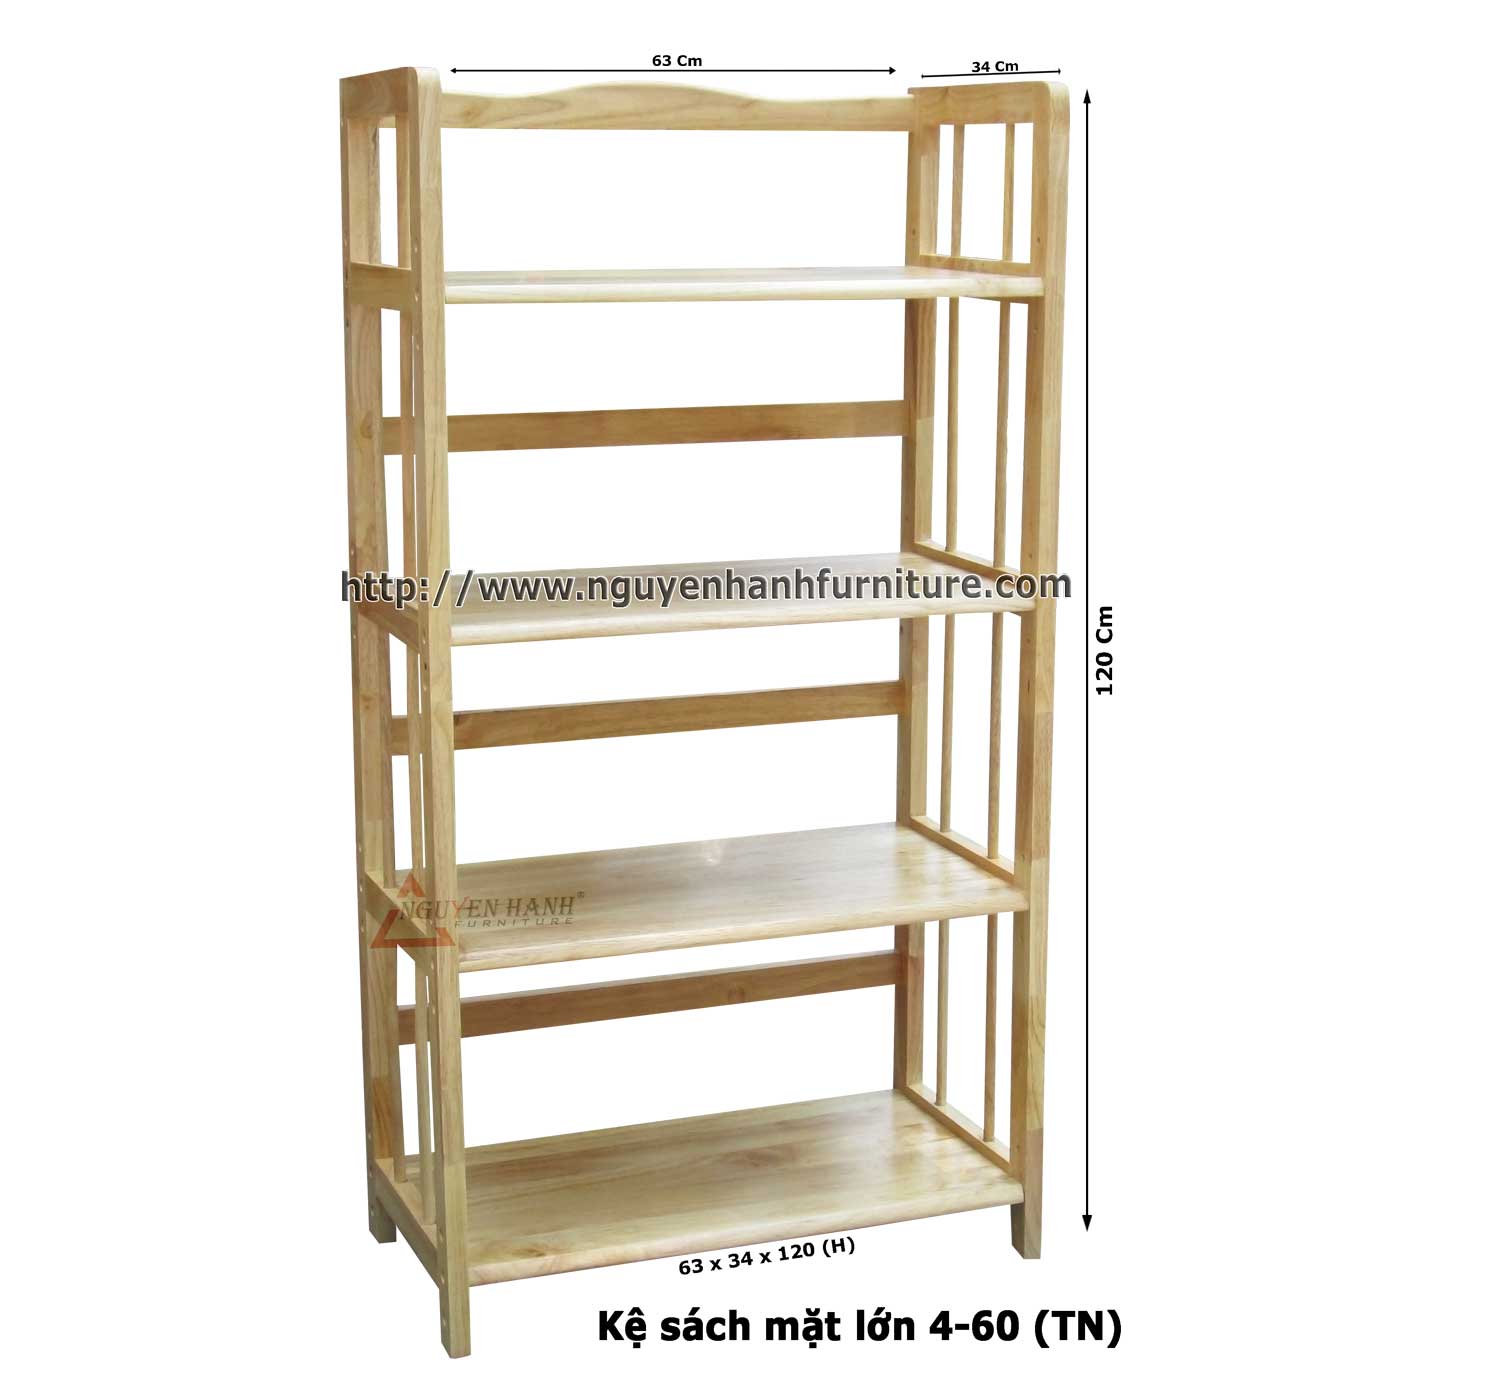 Name product: 4 story bookshelf large surface 60 (Natural) - Dimensions: 63 x 34 x 120 (H) - Description: Wood natural rubber 